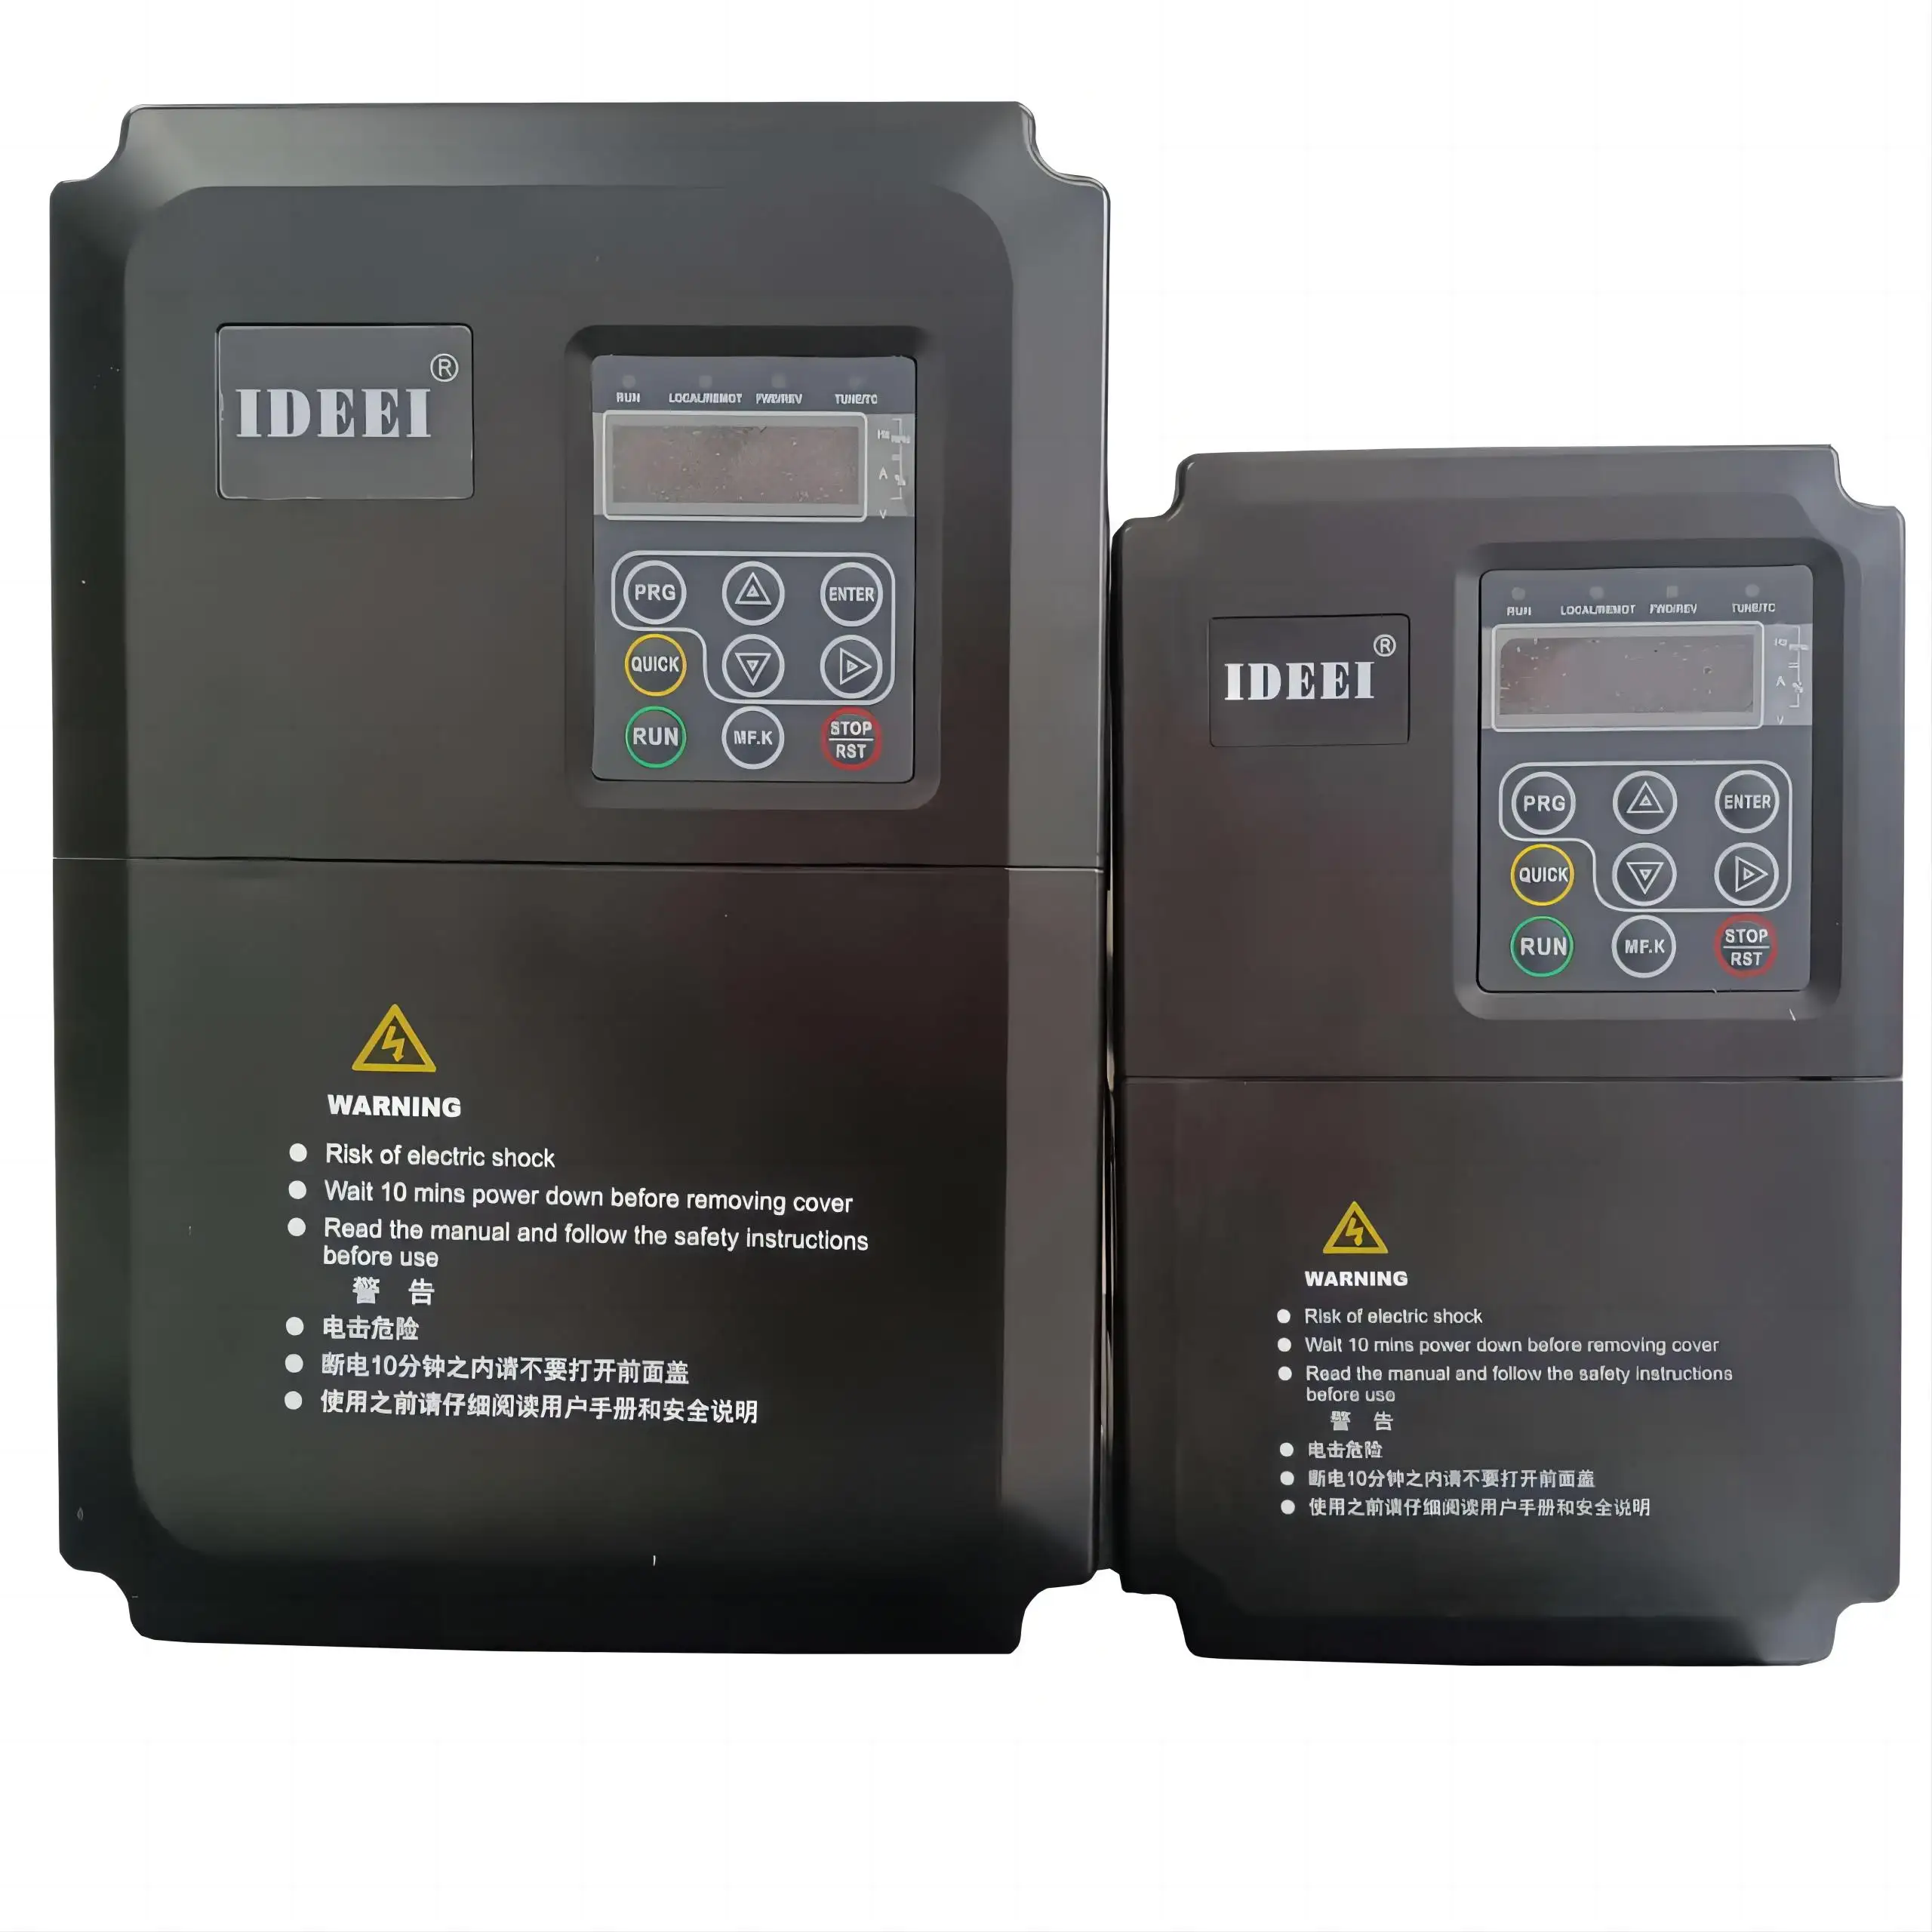 IDEEI QBD5500 Factory Price 7.5kW 3 Phase 380V Elevator Parts Frequency Inverter VVVF Drive Step Lift Escalator Controller VFD